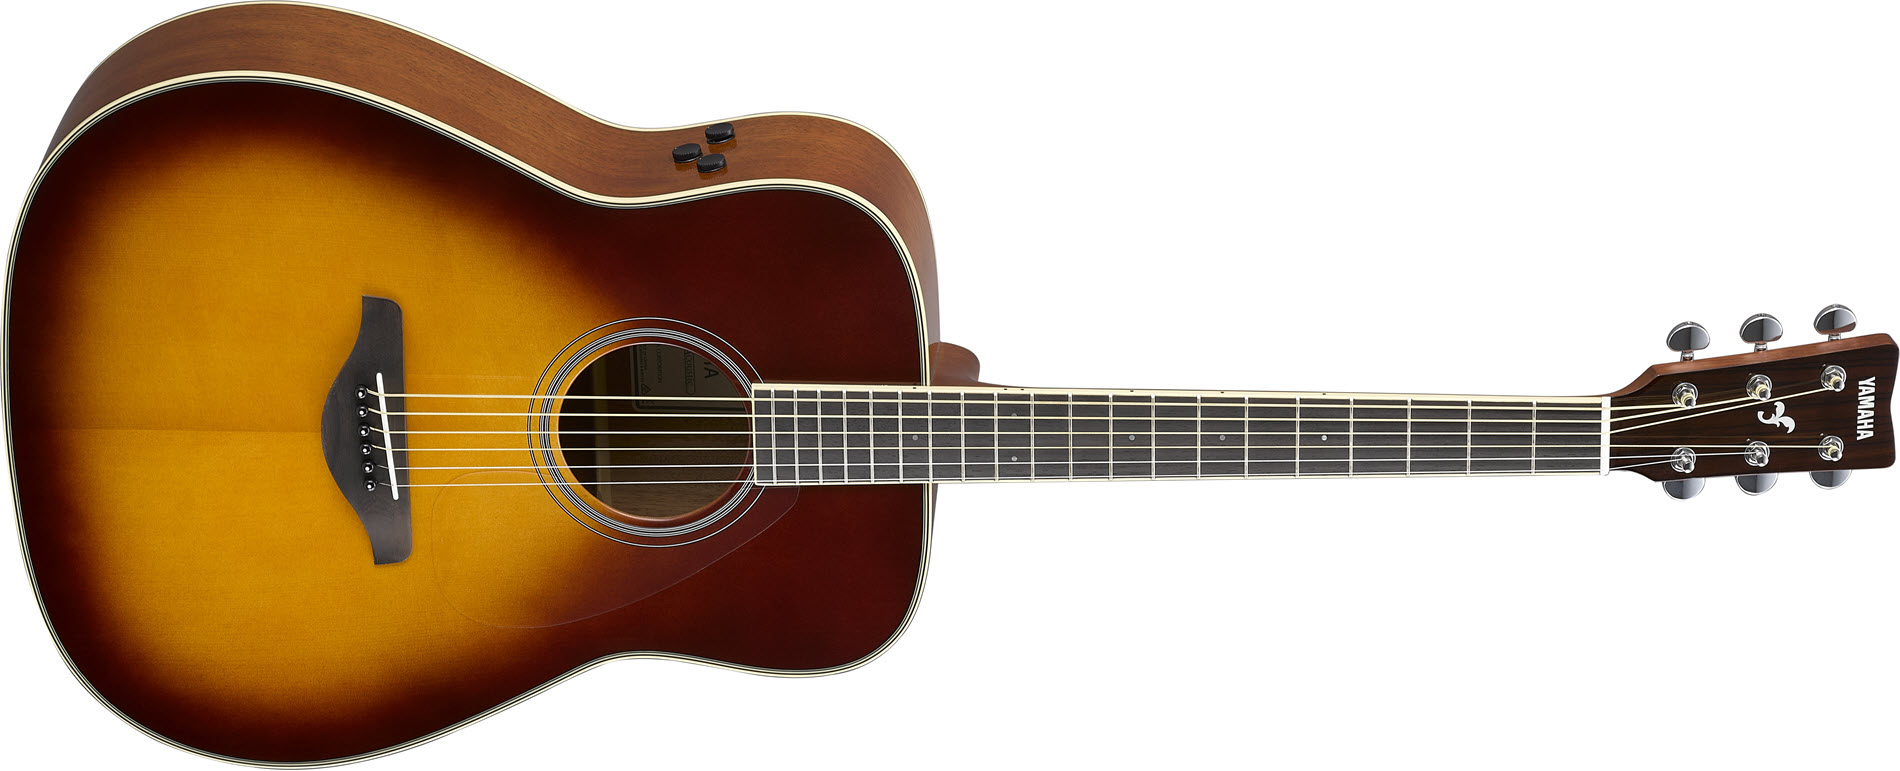 Front view of an acoustic guitar laying on its side with three small knobs on side of body.